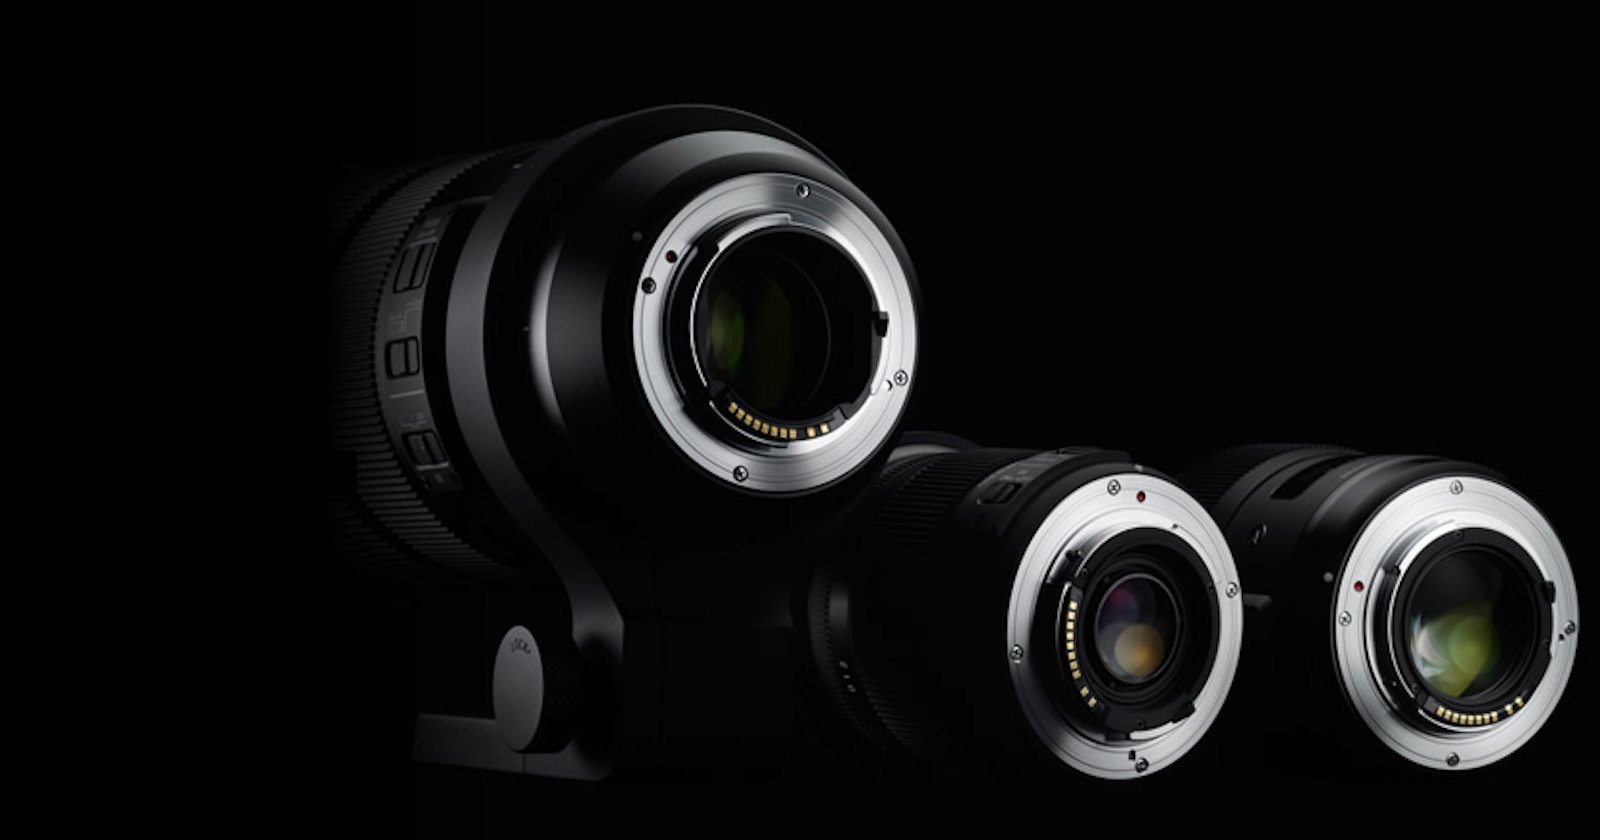 Sigma is Working on a Canon RF Lens Roadmap for 2020: Report